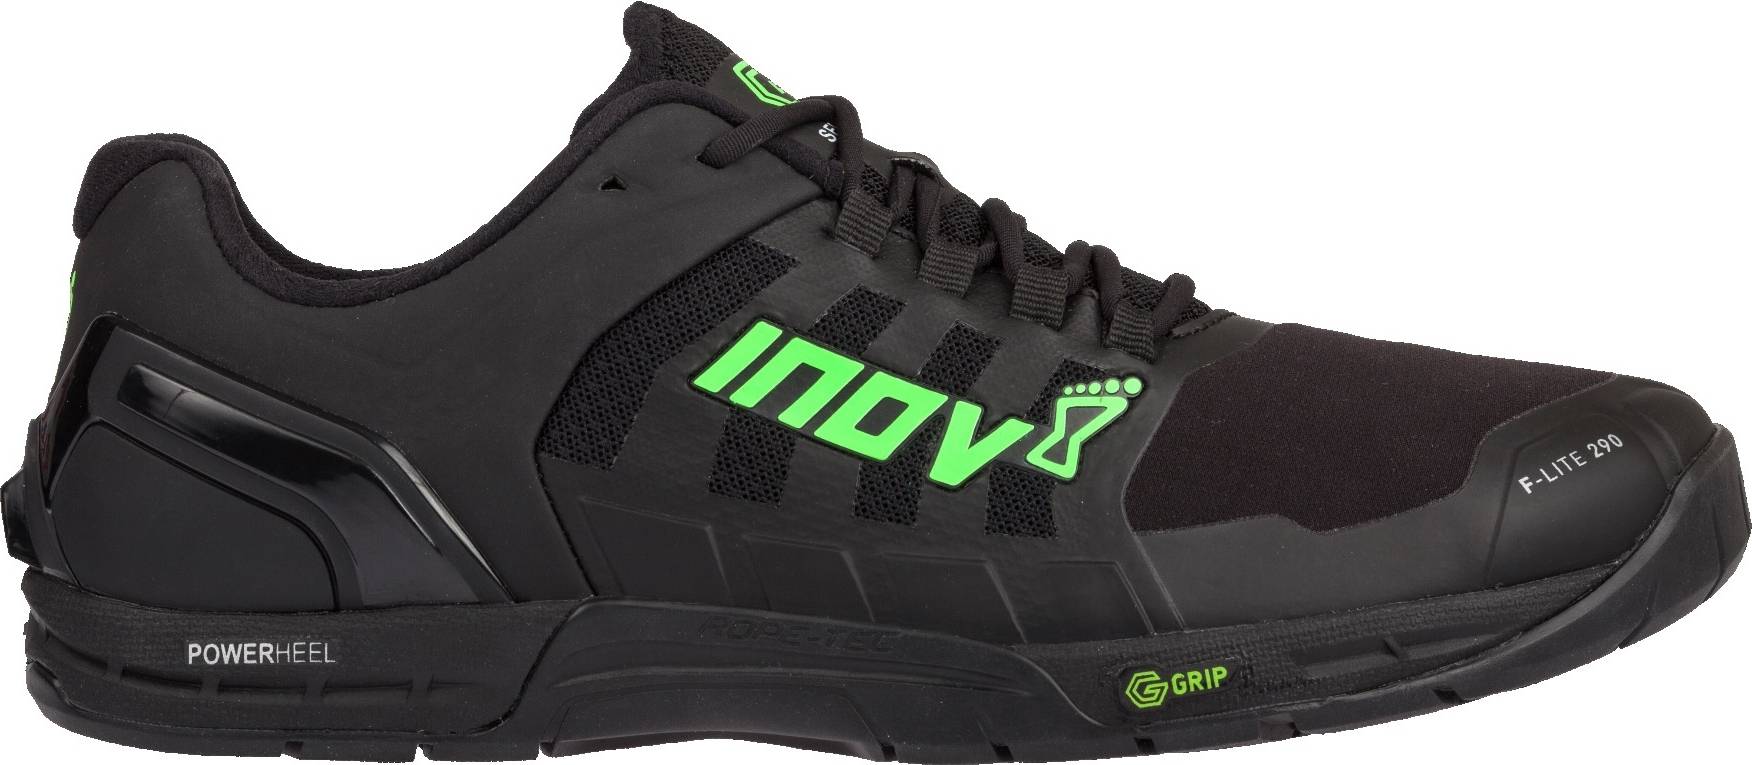 Save 54% on Inov-8 Crossfit Shoes (14 